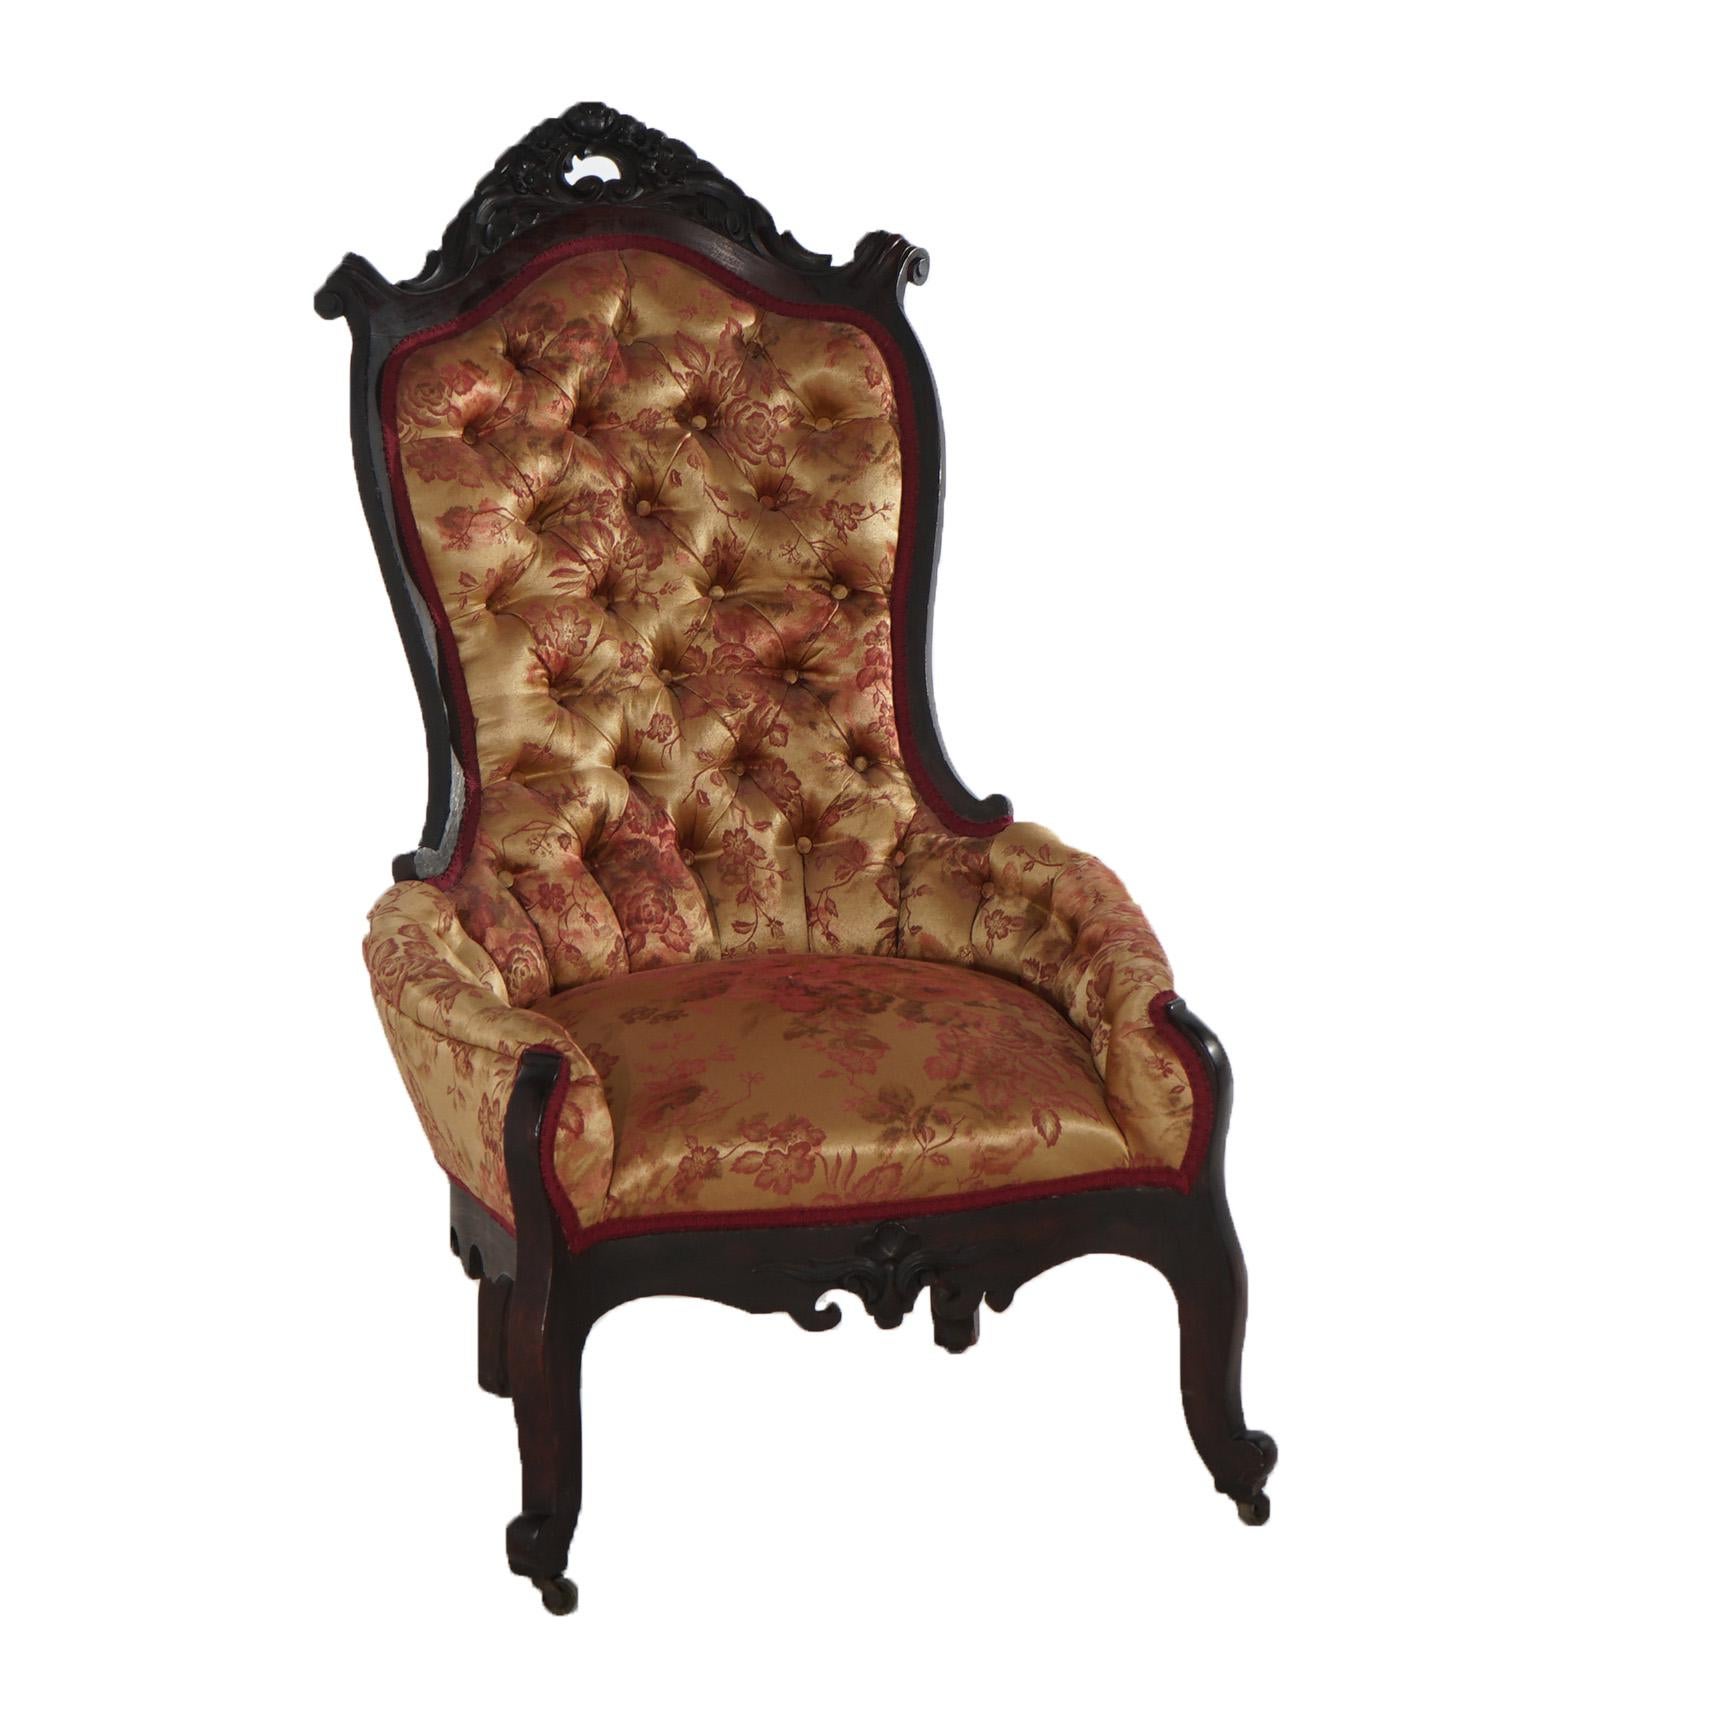 Antique Victorian Carved Walnut & Upholstered Lady’s Boudoir Chair C1890 For Sale 7